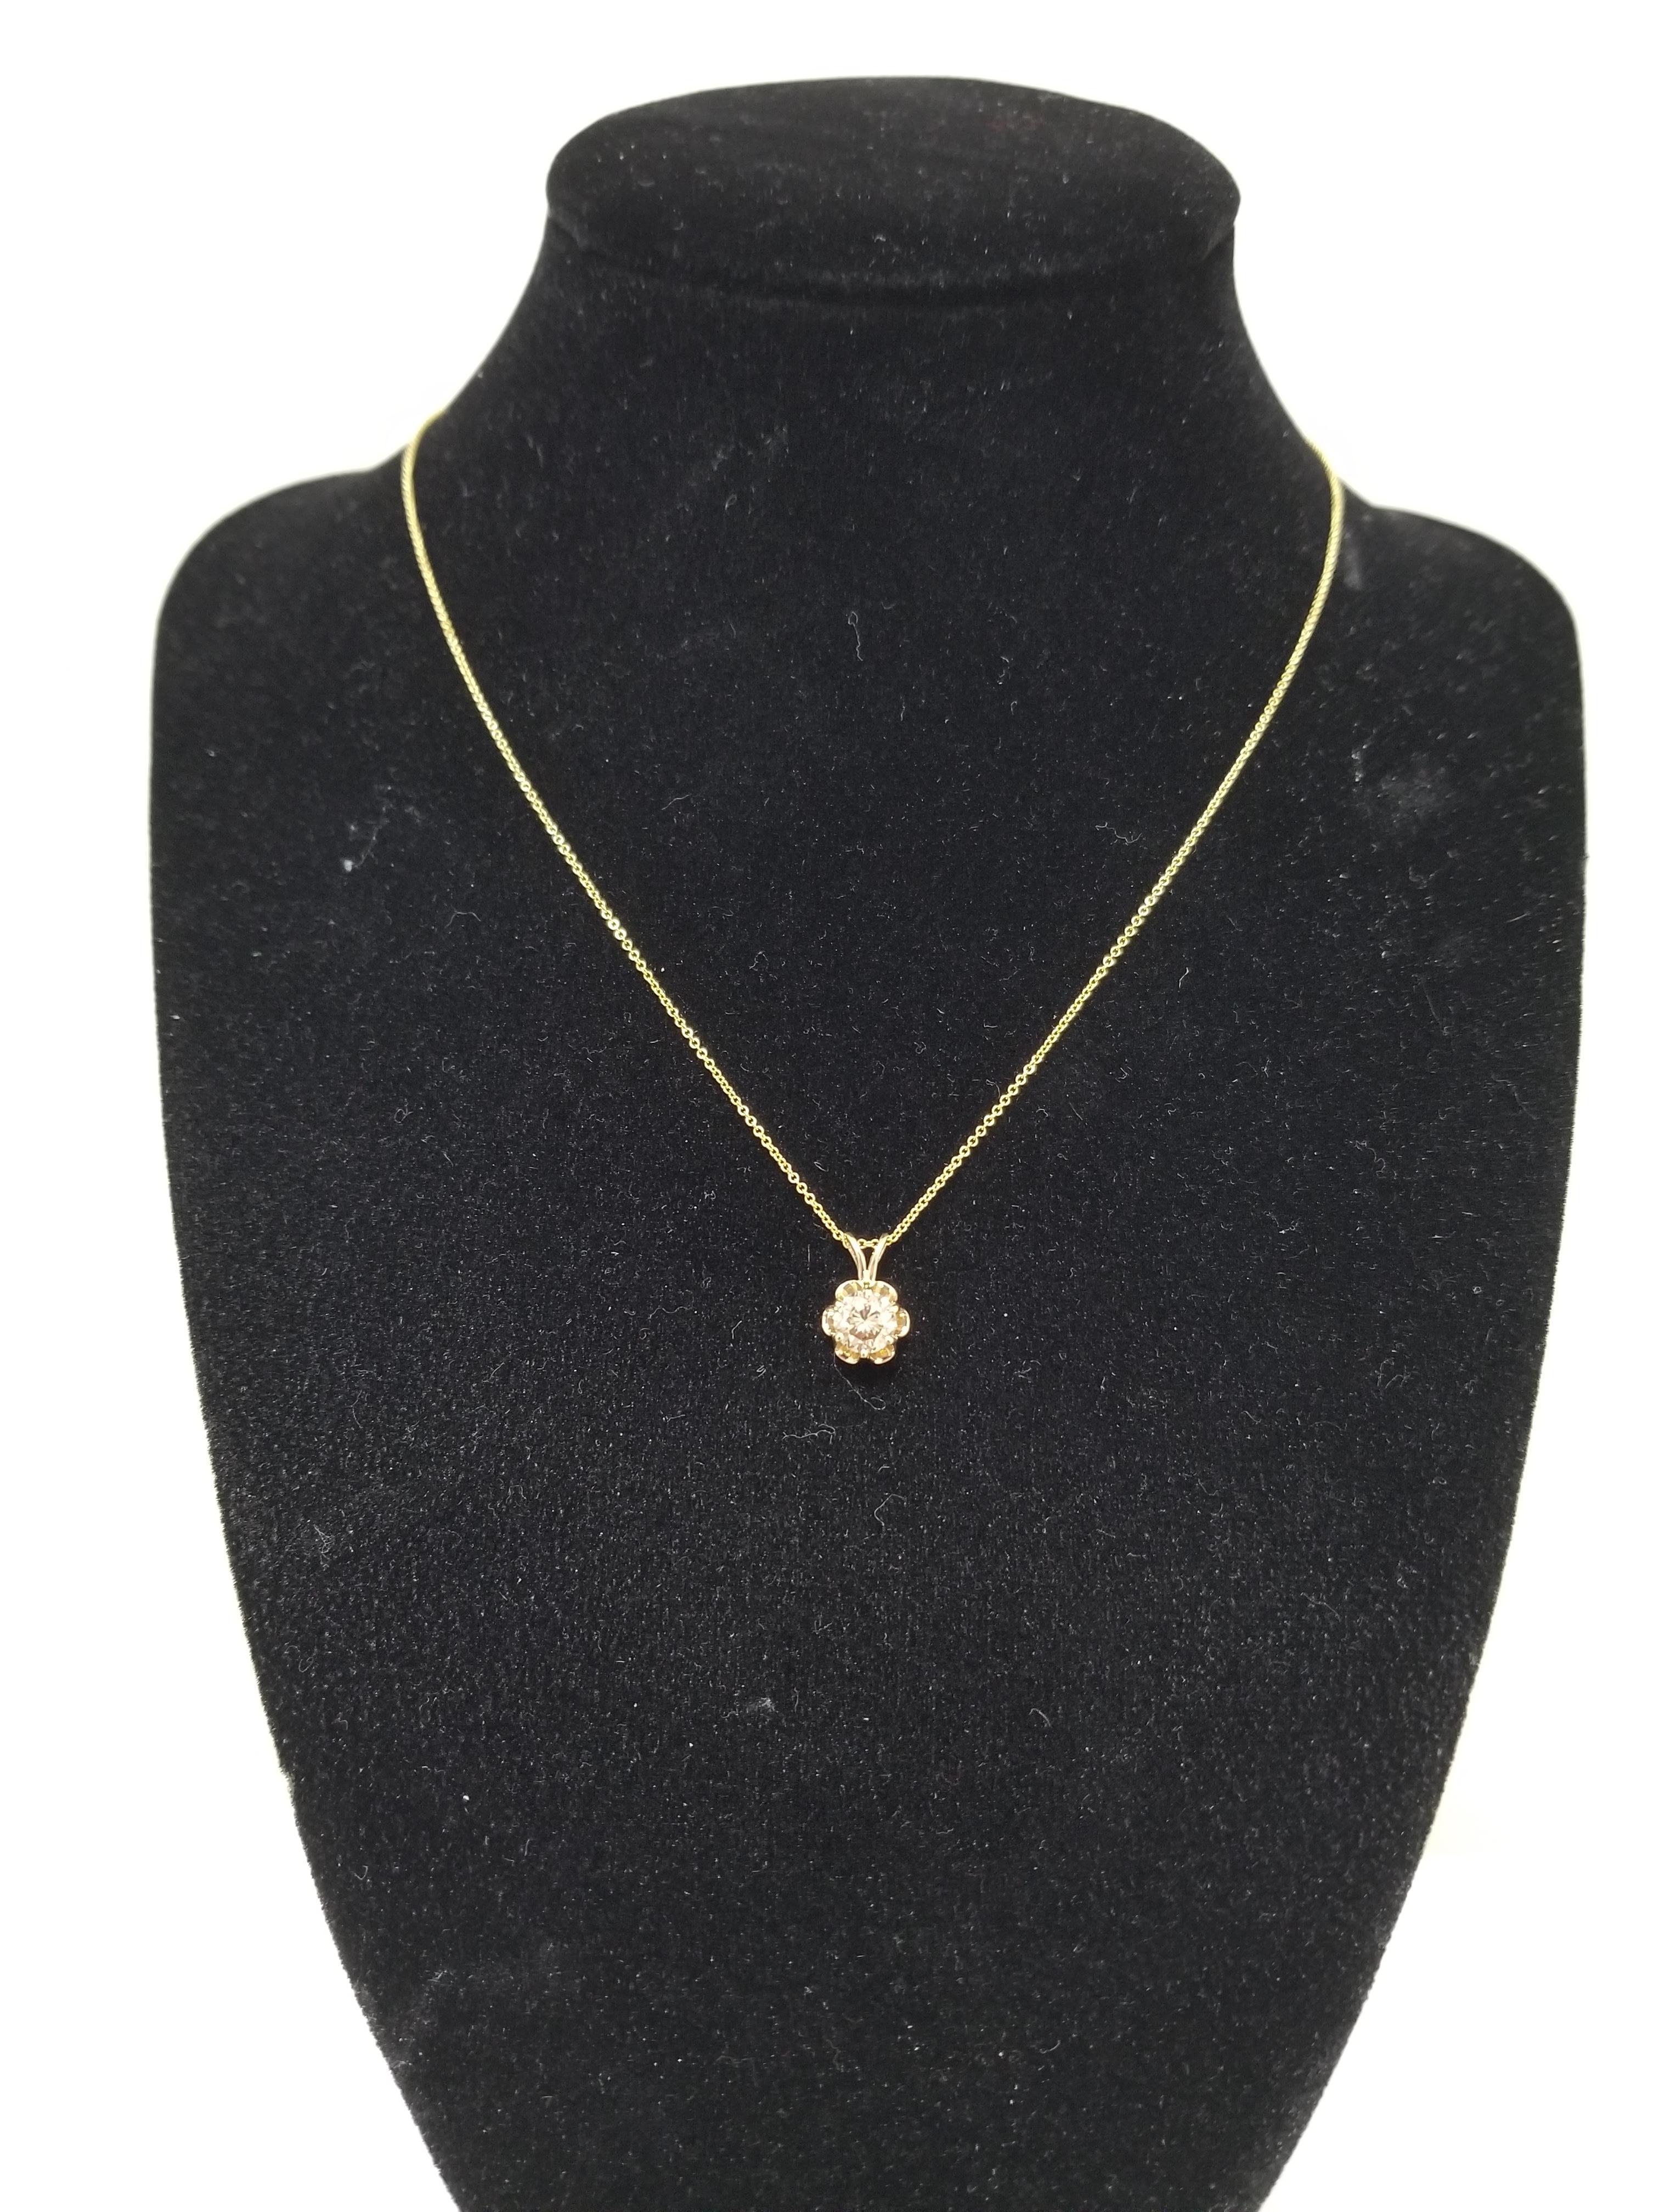 This gorgeous diamond pendant features a 0.78 carat GIA round brilliant cut diamond solitaire set in a beautiful 14 karat yellow gold buttercup design. . Pendant measures approximately 0.5 inch length and 0.25 inch wide. 

(Pendant Only - Chain sold